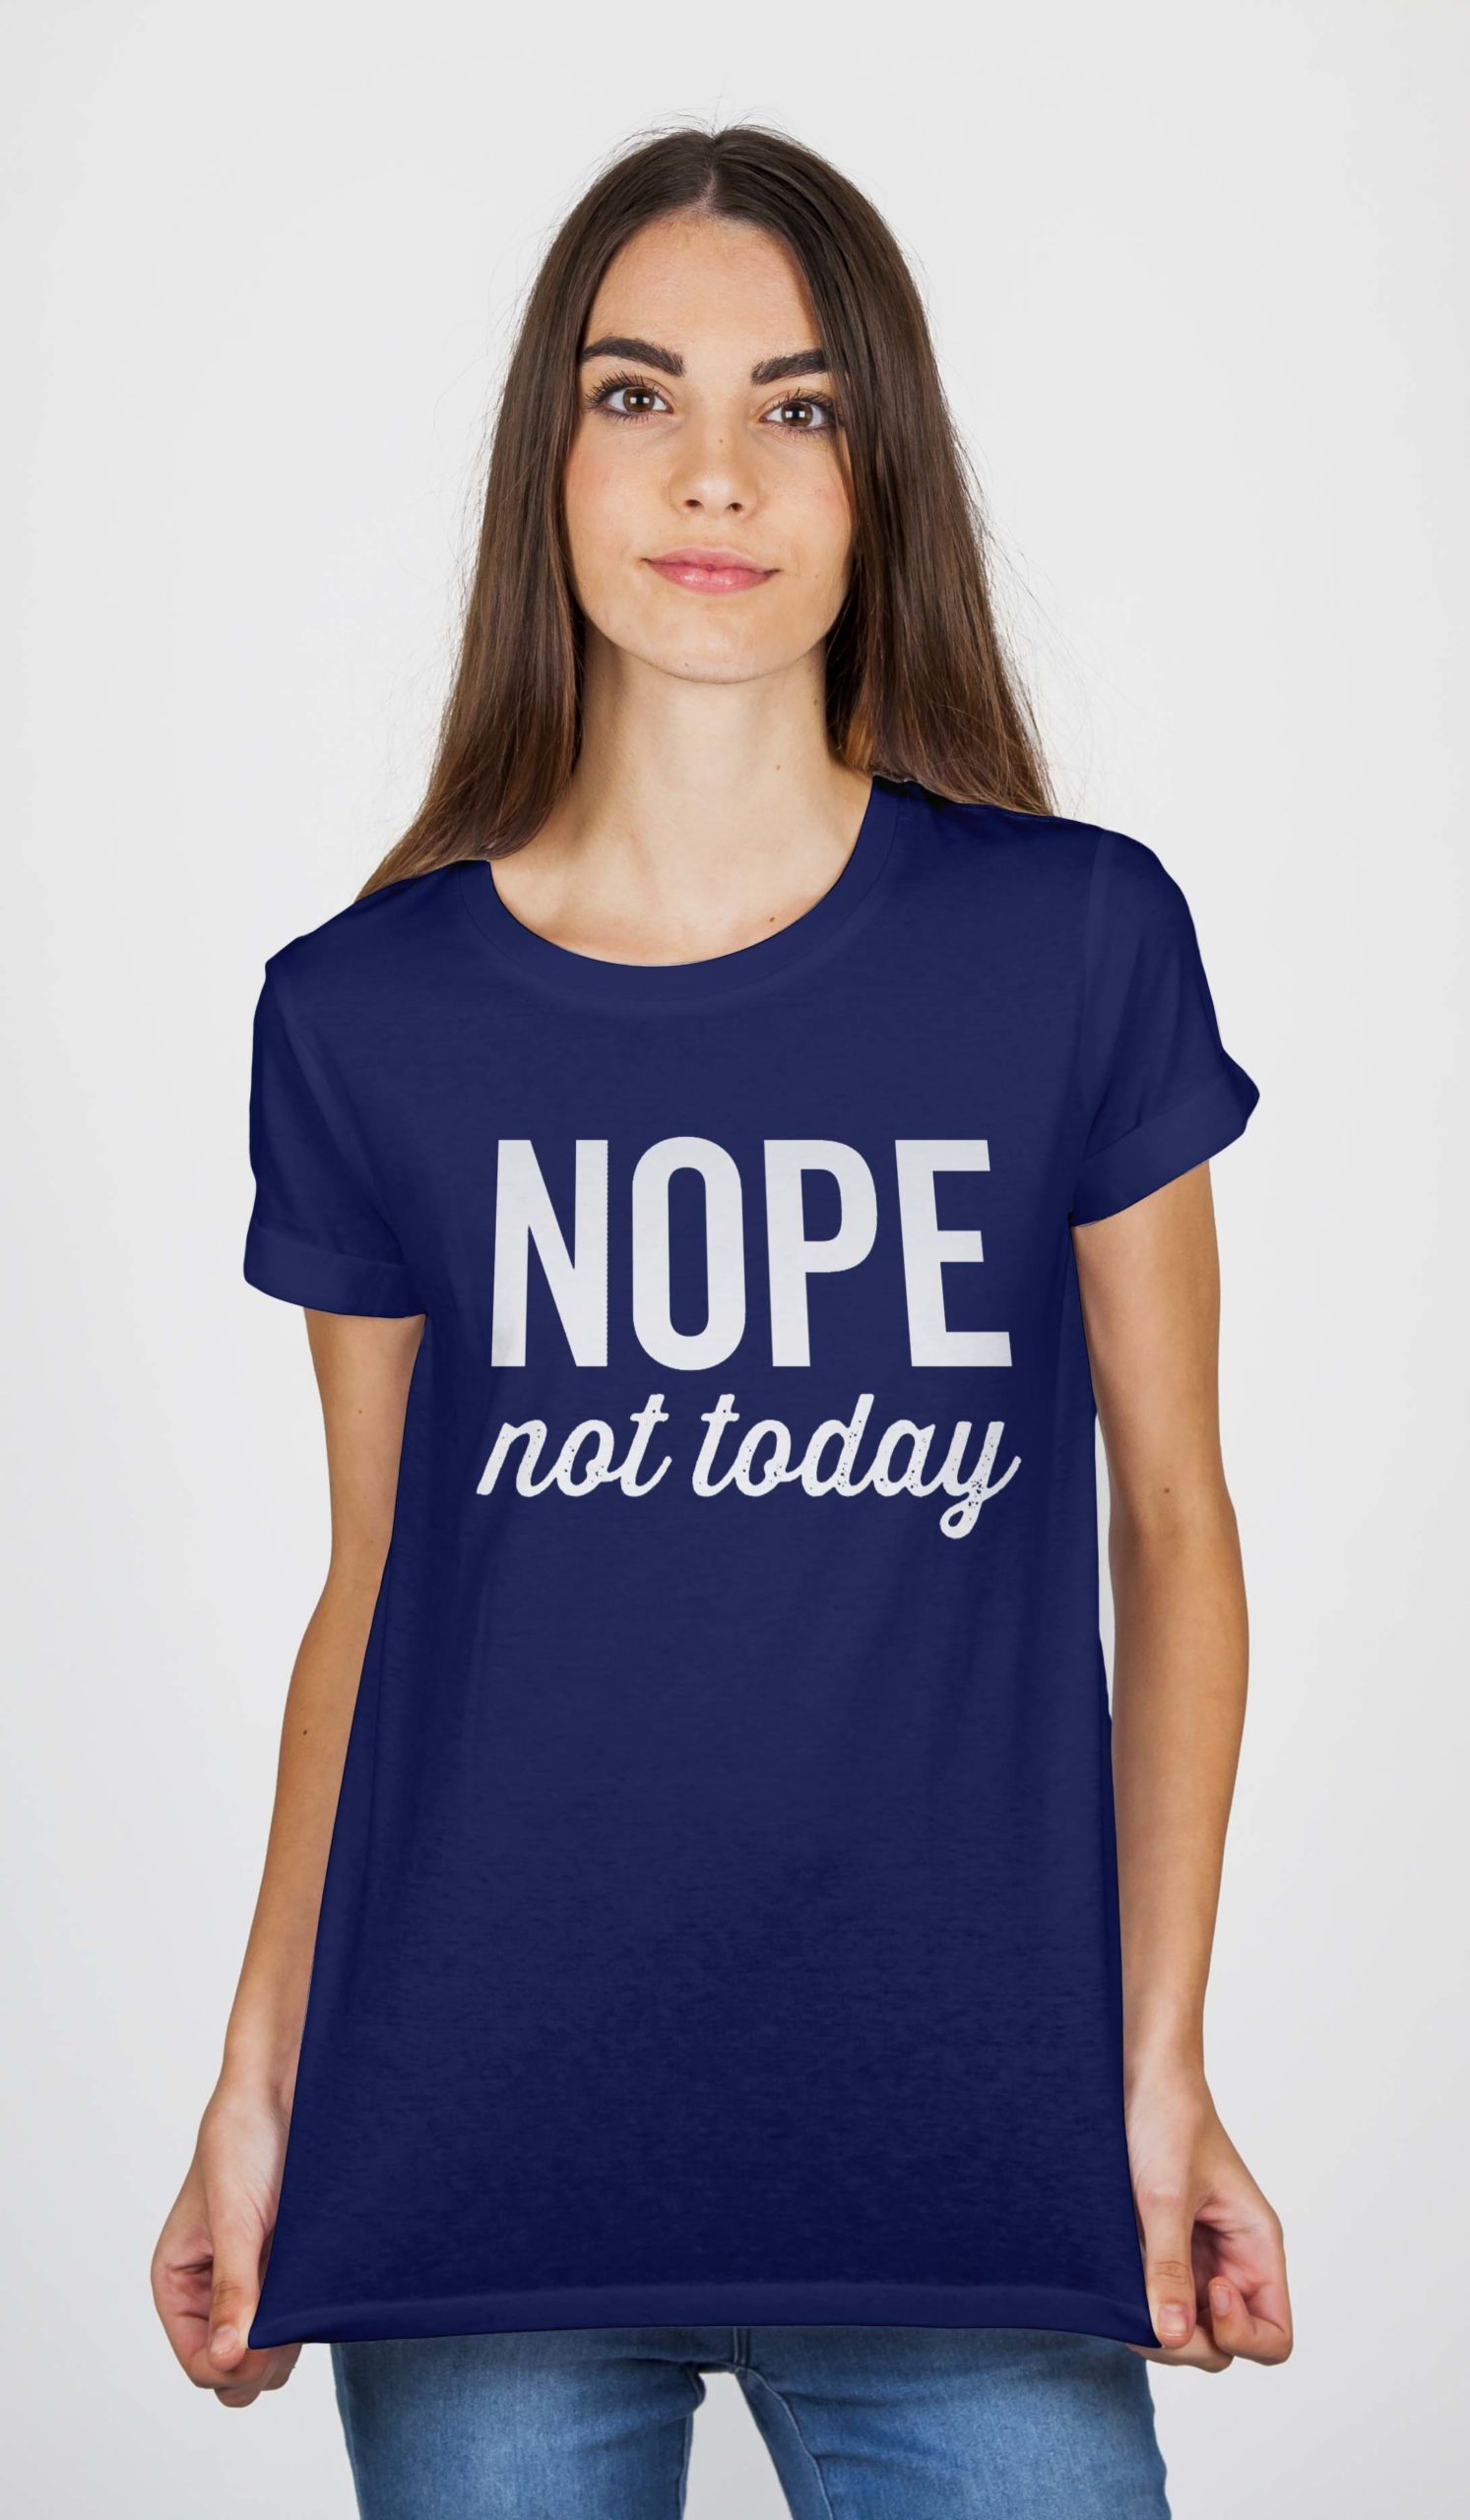 Nope Not Today Navy Blue T-Shirt - Swag Shirts